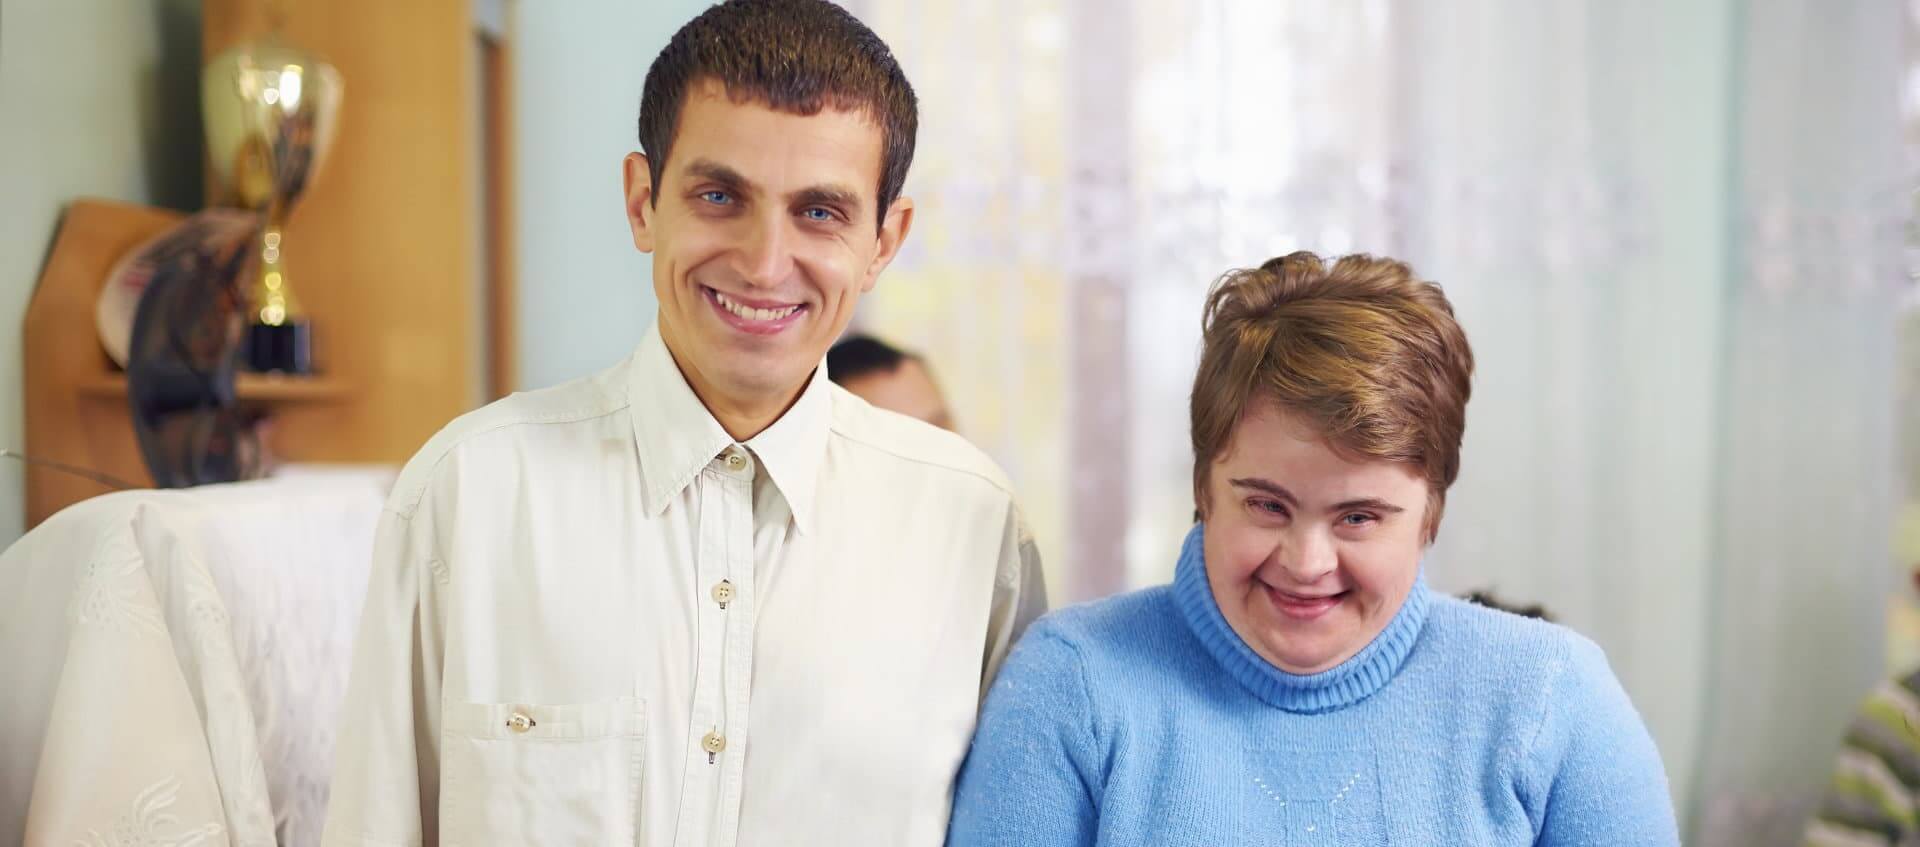 adult man and woman smiling